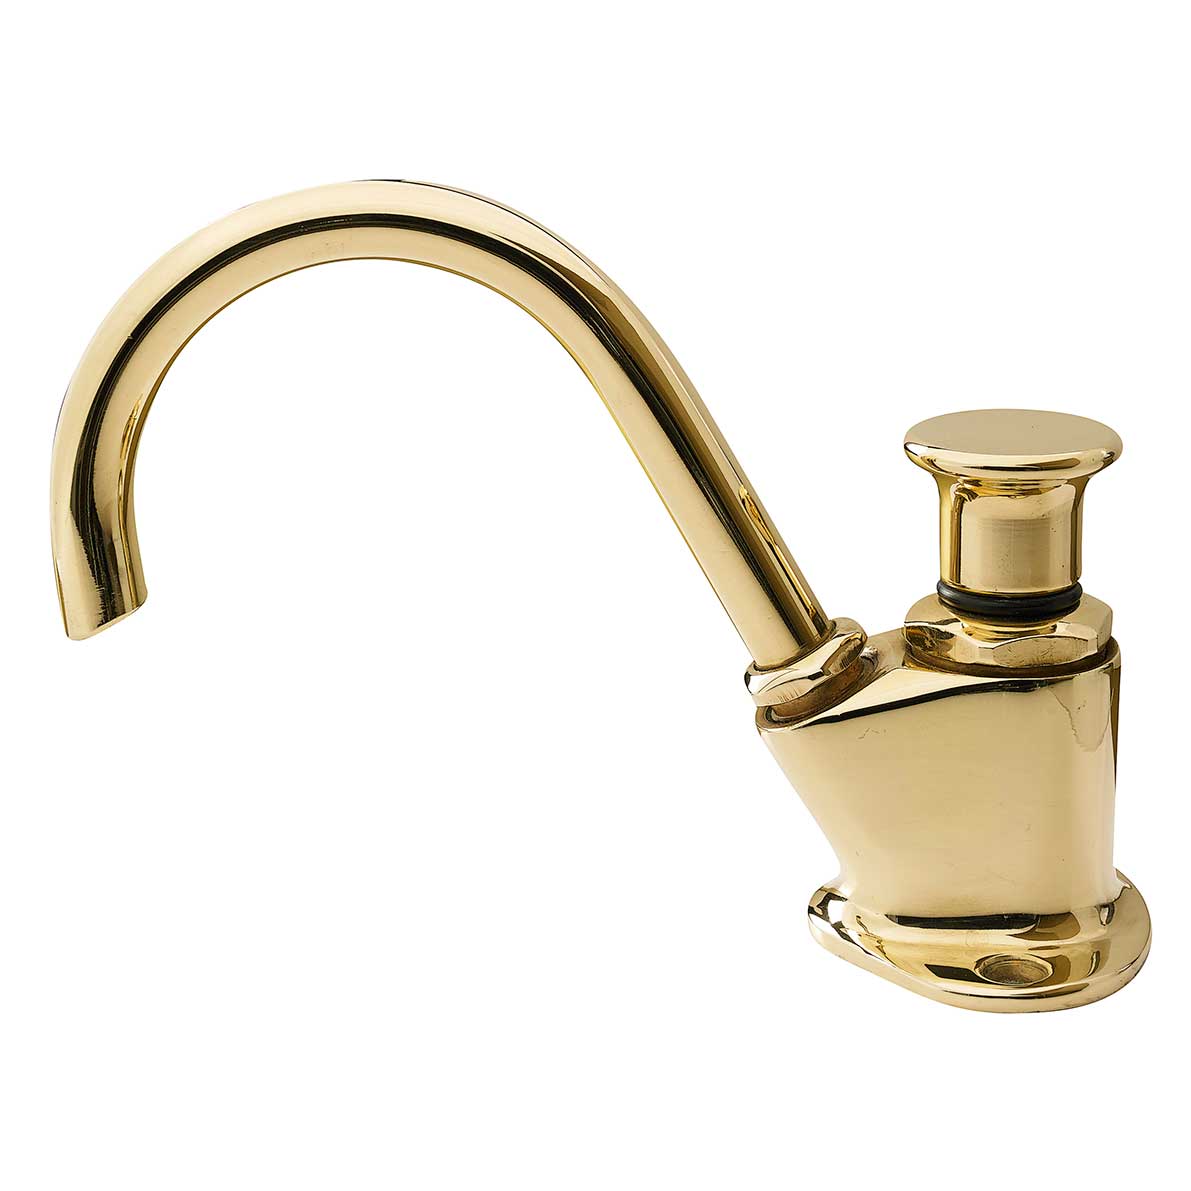 Lever Galley Pumps by Davey & Company - In Brass or Chrome